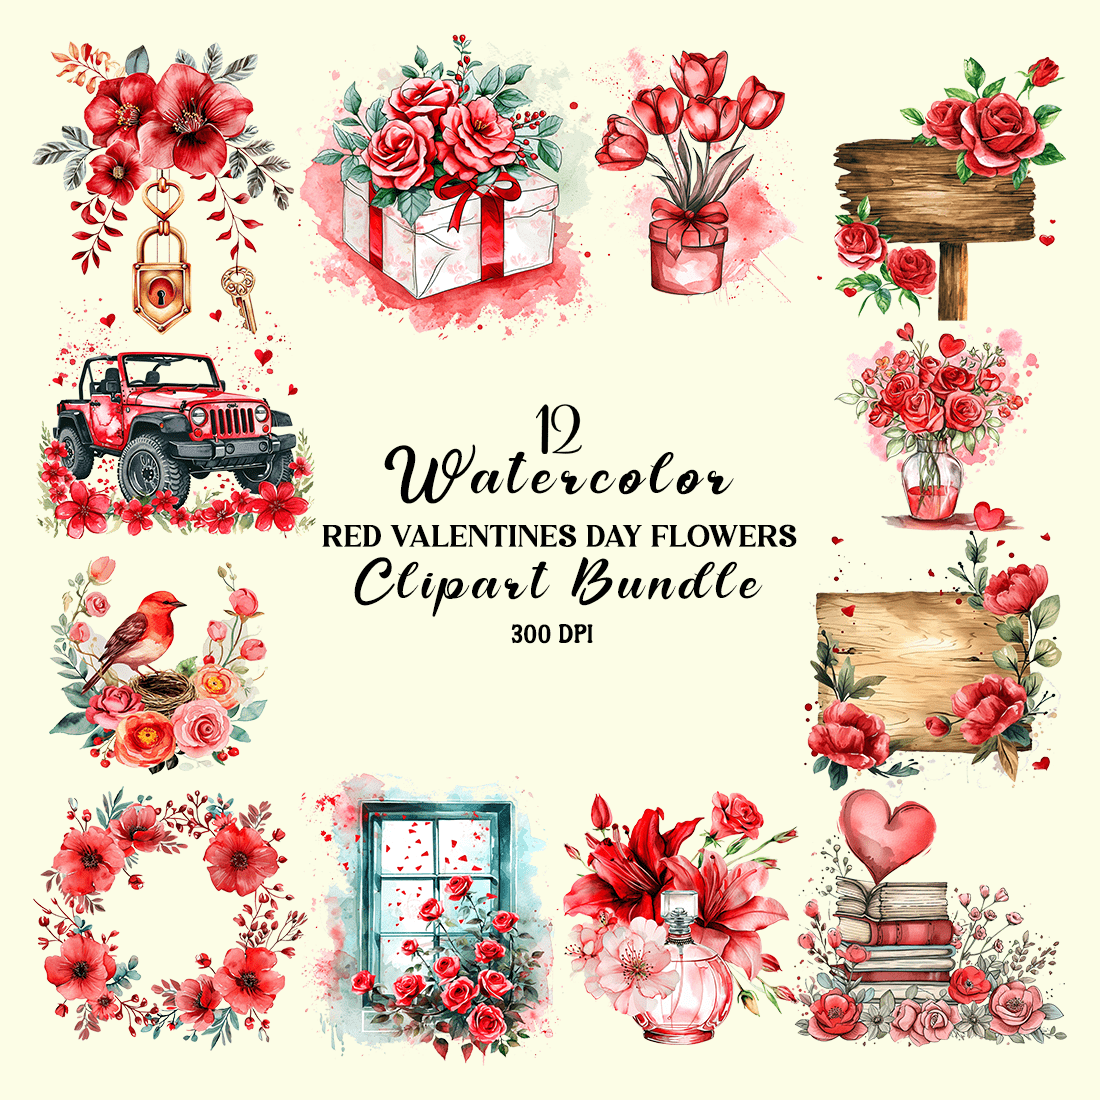 Watercolor Red Valentines Day Flowers Clipart Bundle cover image.